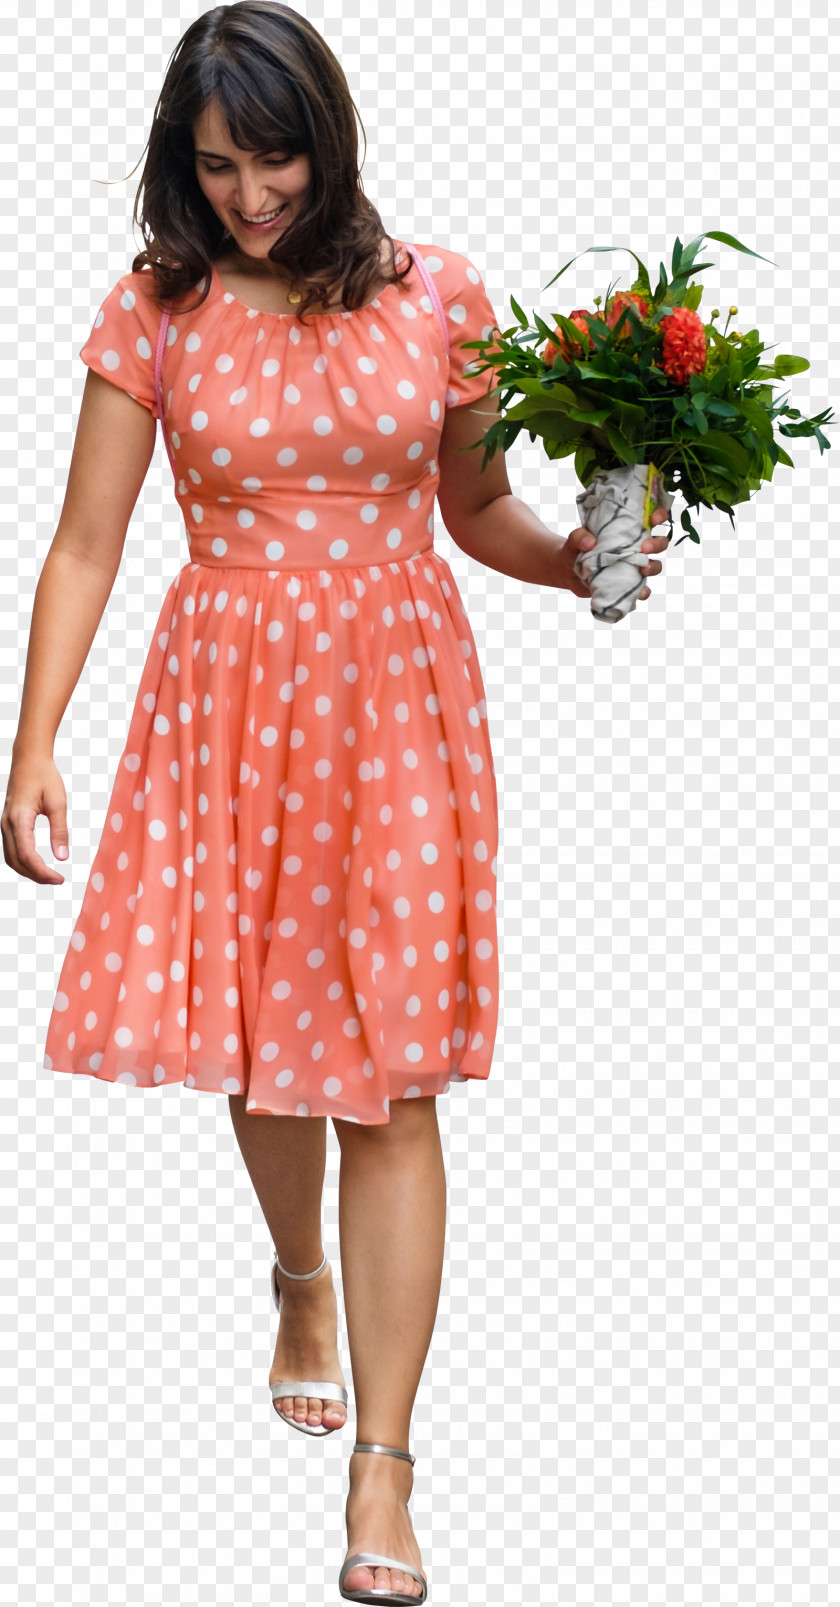 University Student Walking Clipping Path PNG